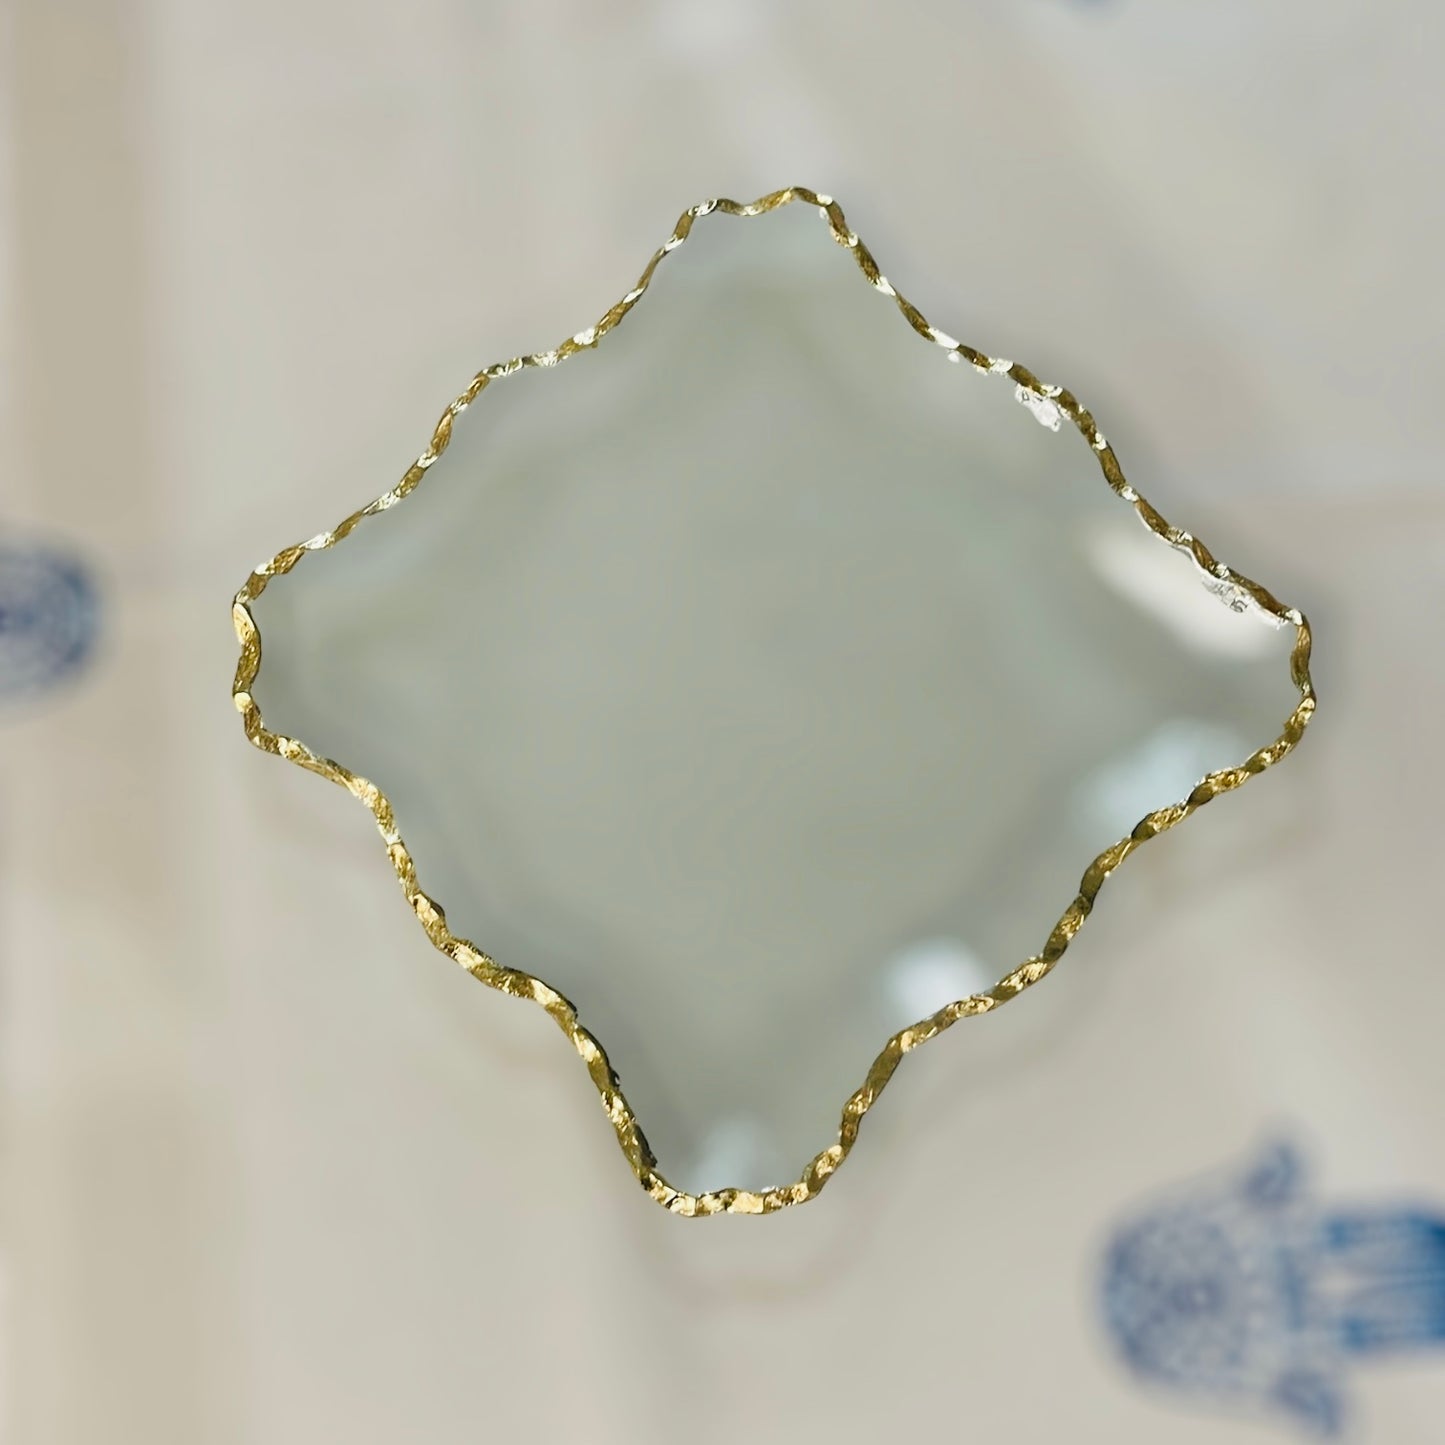 Square serving glass with Gold trim plate